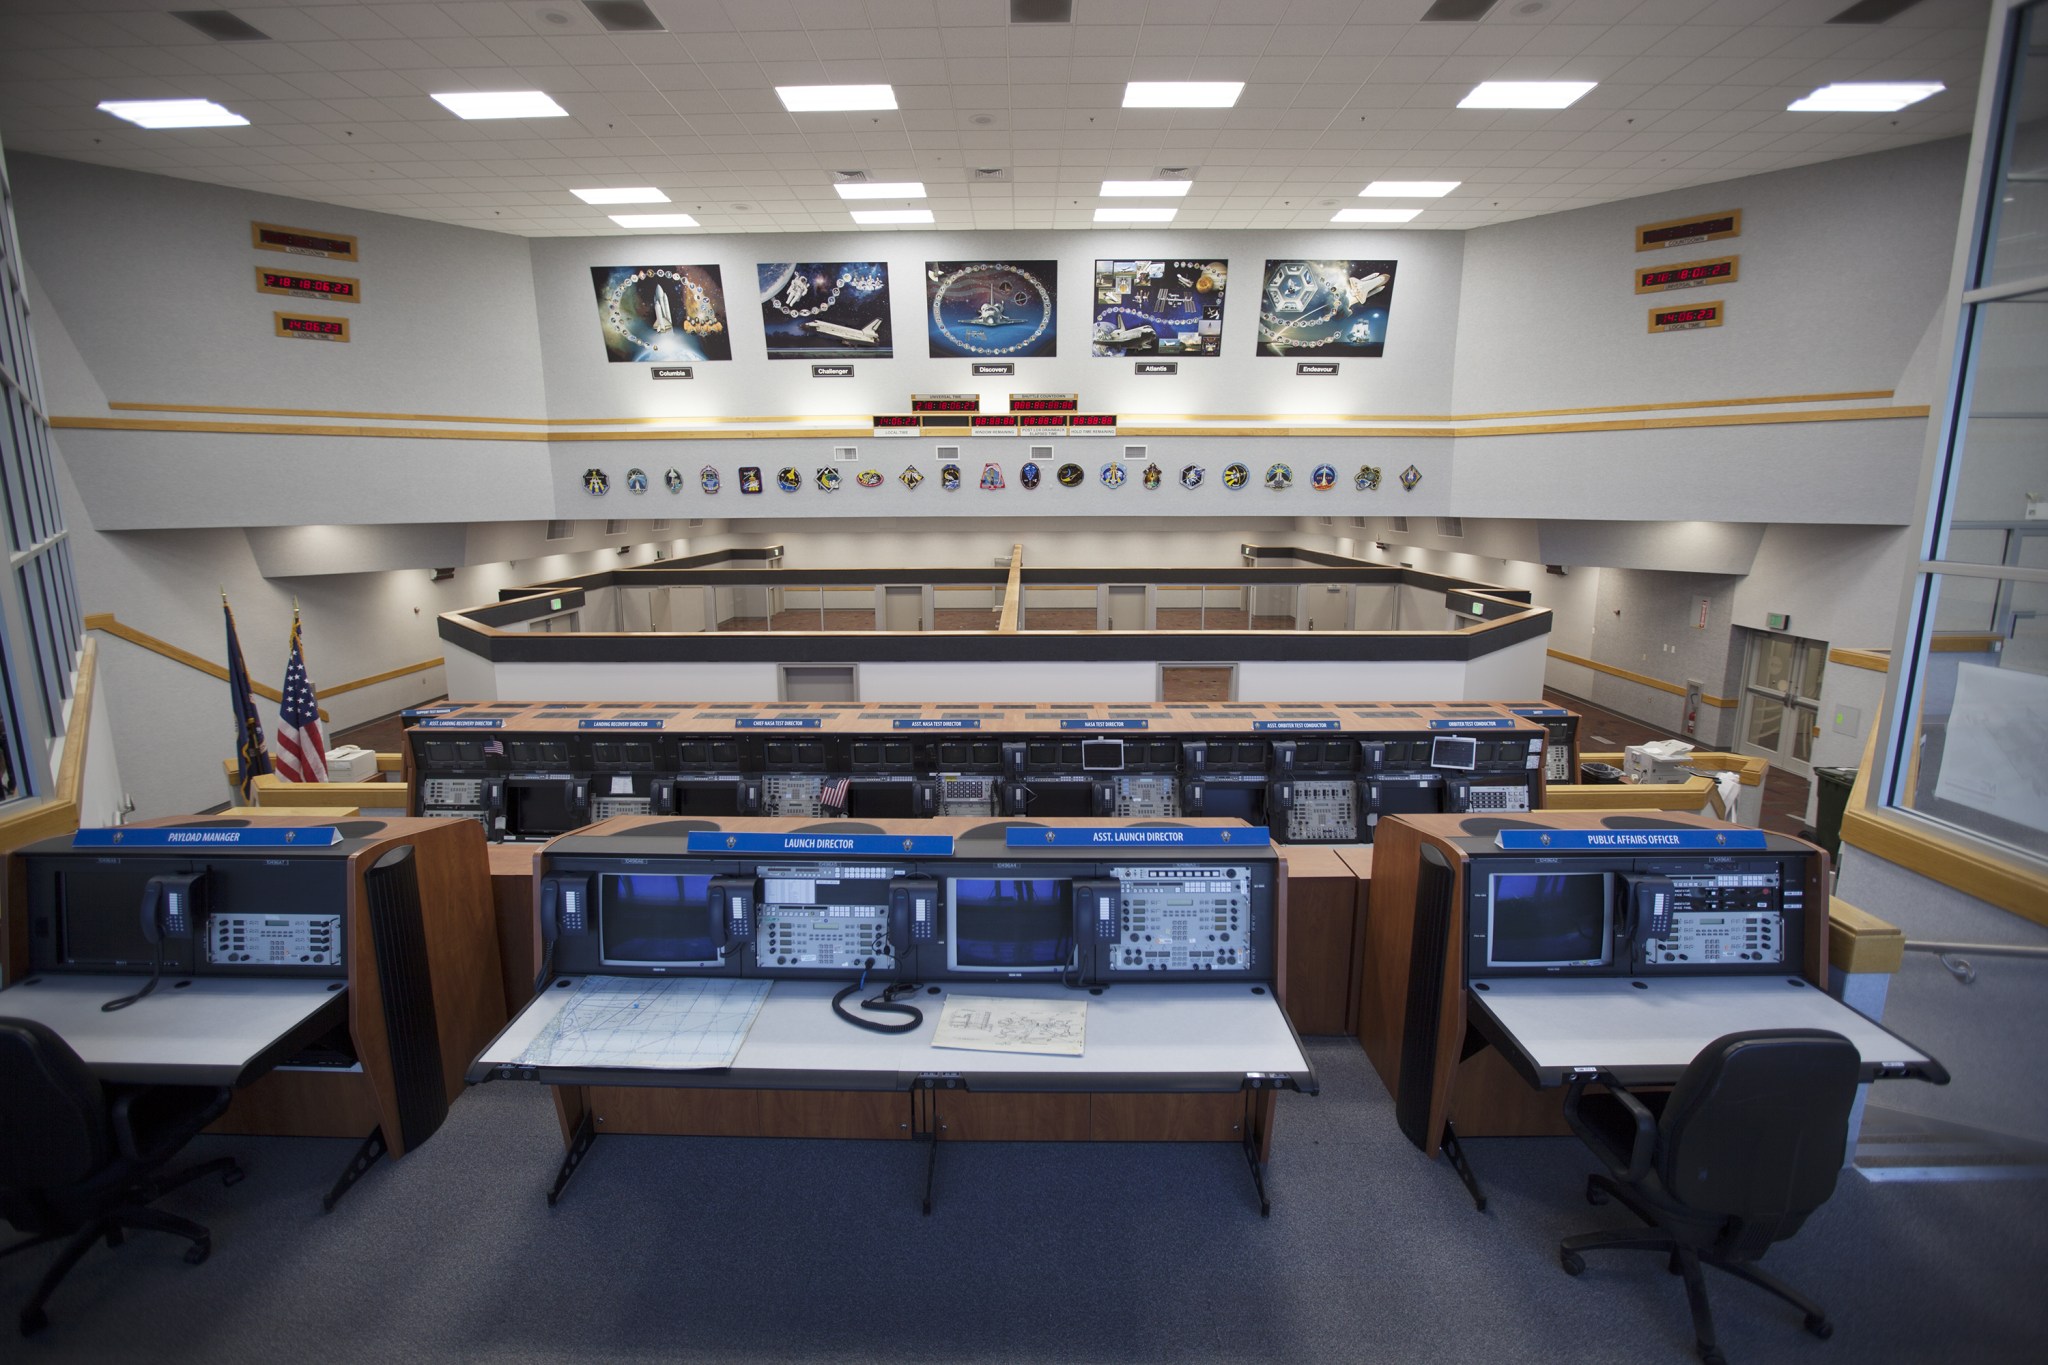 Inside Firing Room 4 in the Launch Control Center at NASA's Kennedy Space Center in Florida, the outer walls, inner walls, windows and doors for the four separate firing rooms on the main floor have been completed. Three rows of upper level management consoles remain and could be used as a fifth firing room.